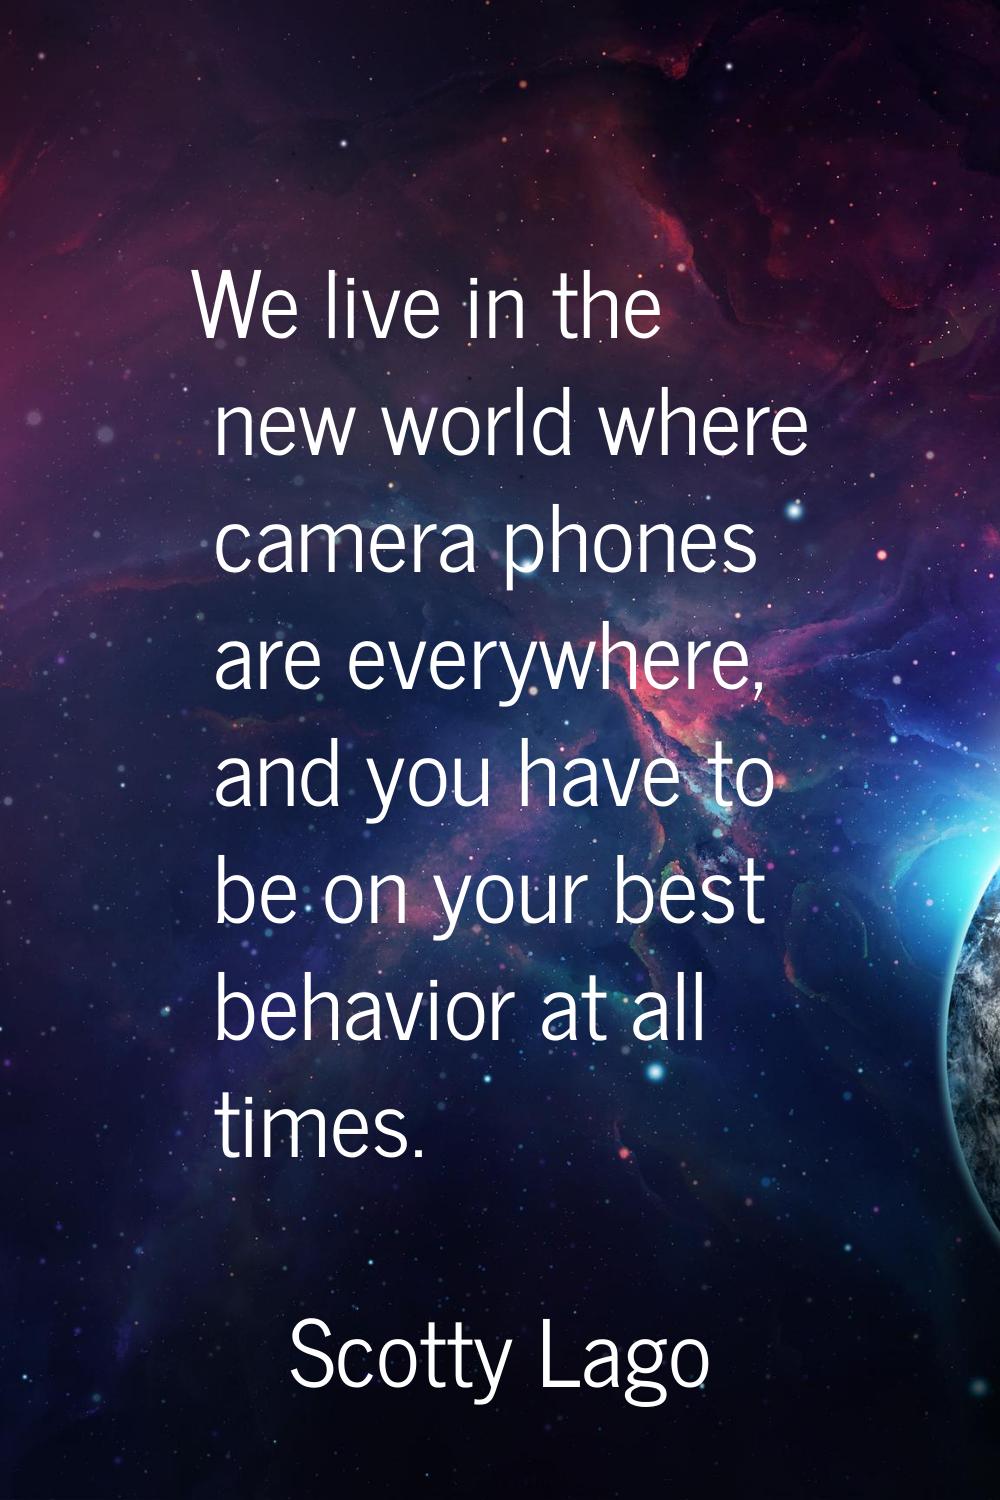 We live in the new world where camera phones are everywhere, and you have to be on your best behavi